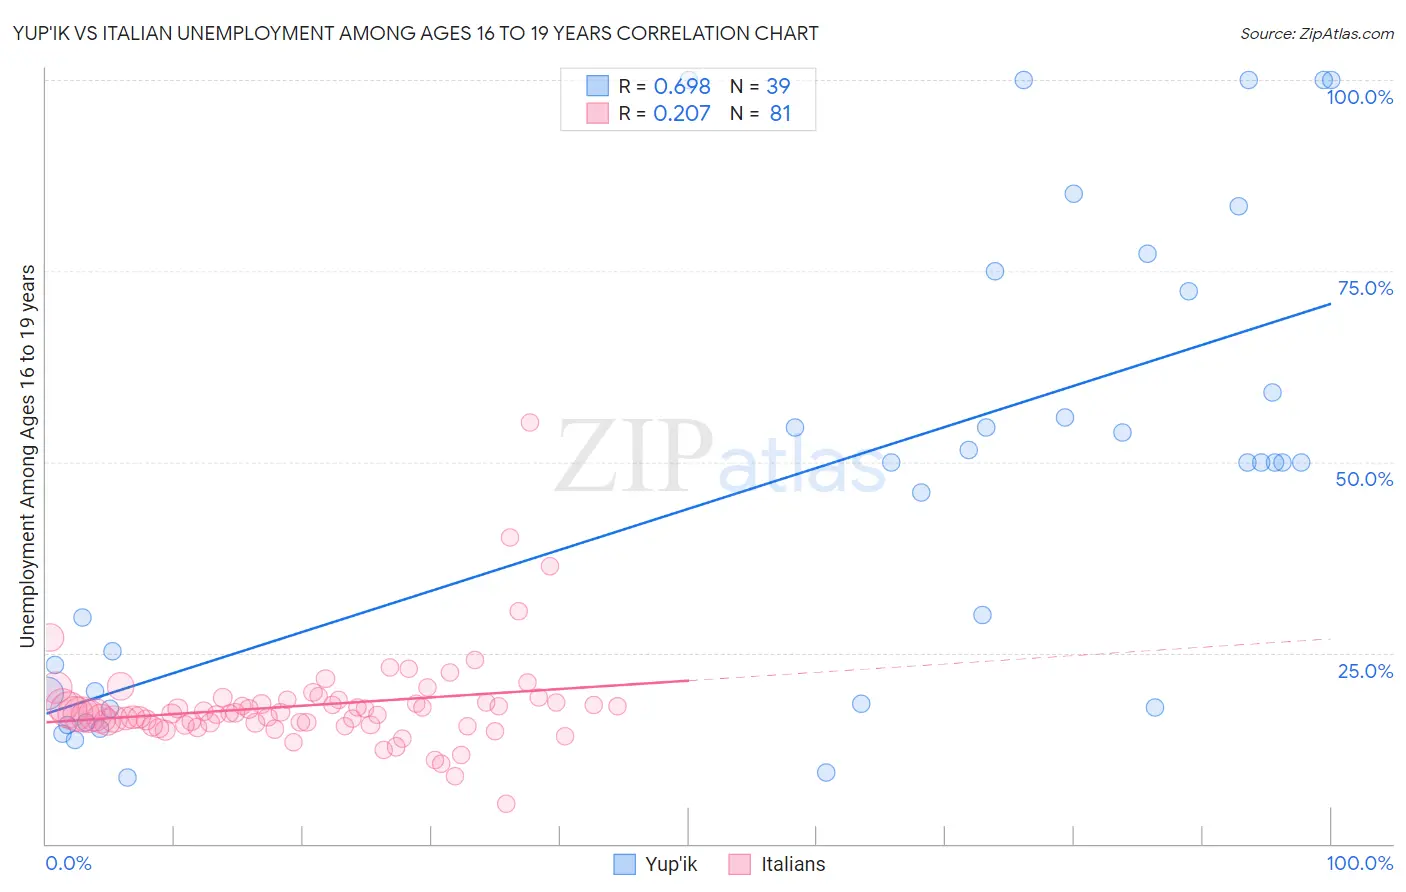 Yup'ik vs Italian Unemployment Among Ages 16 to 19 years